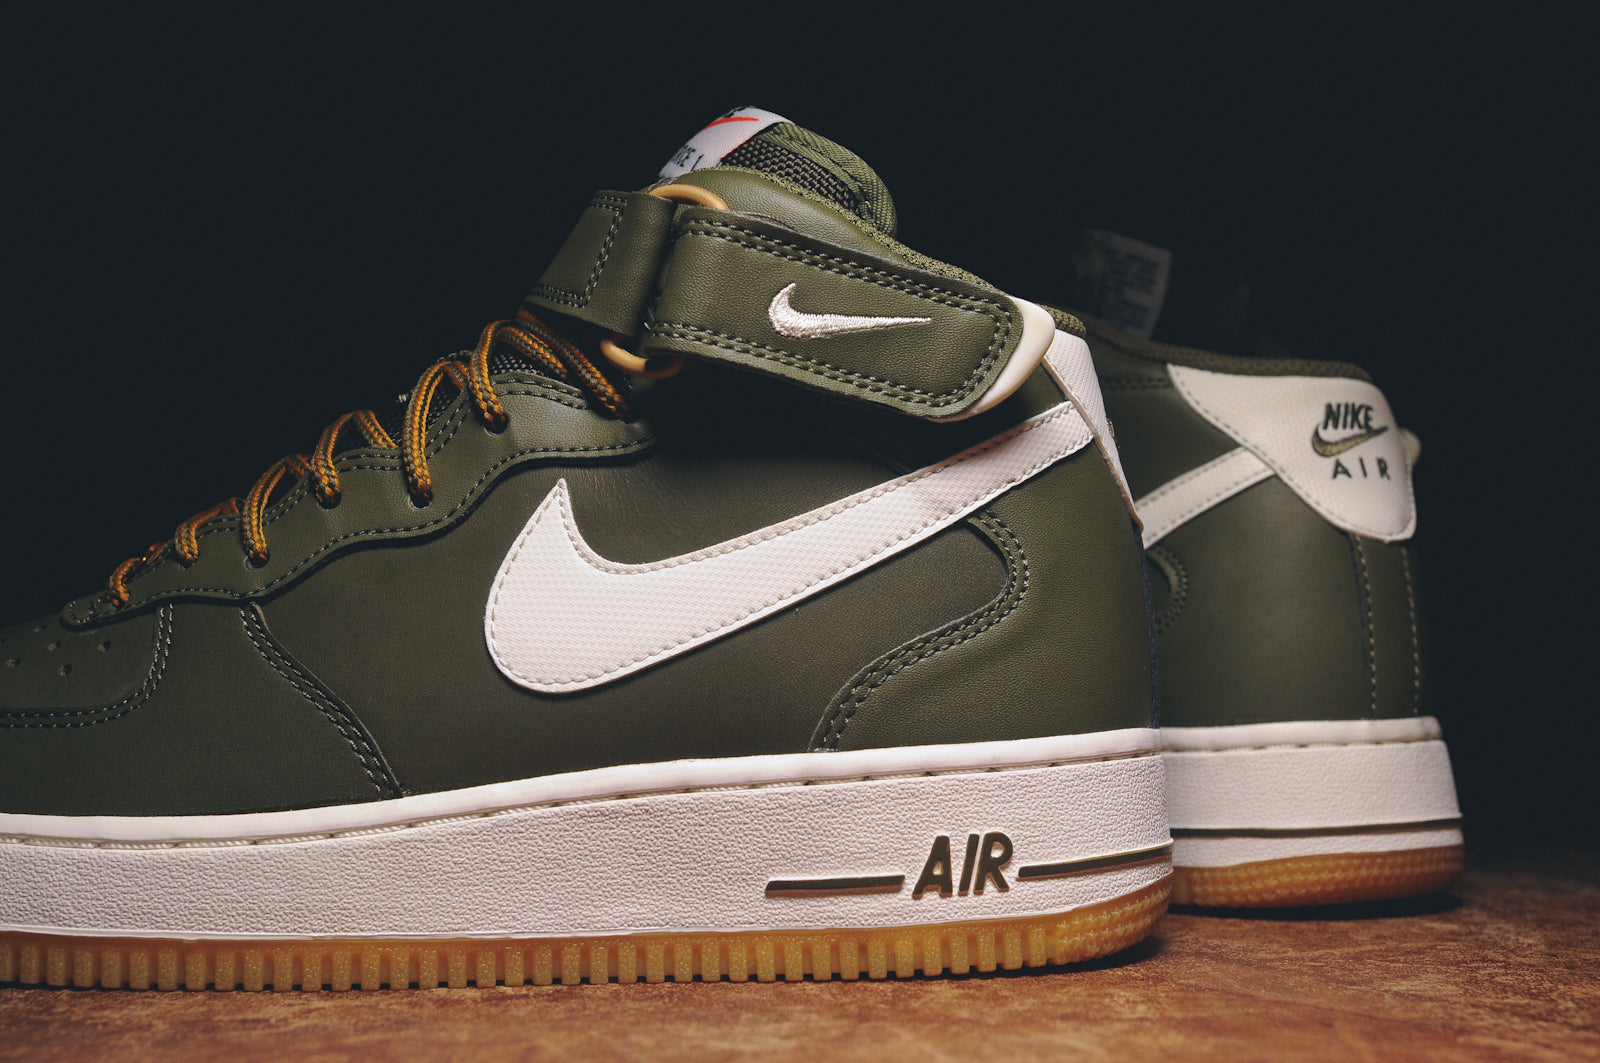 NIKE AIR FORCE 1 MID '07 - OLIVE / GUM @ KITH NYC – Kith